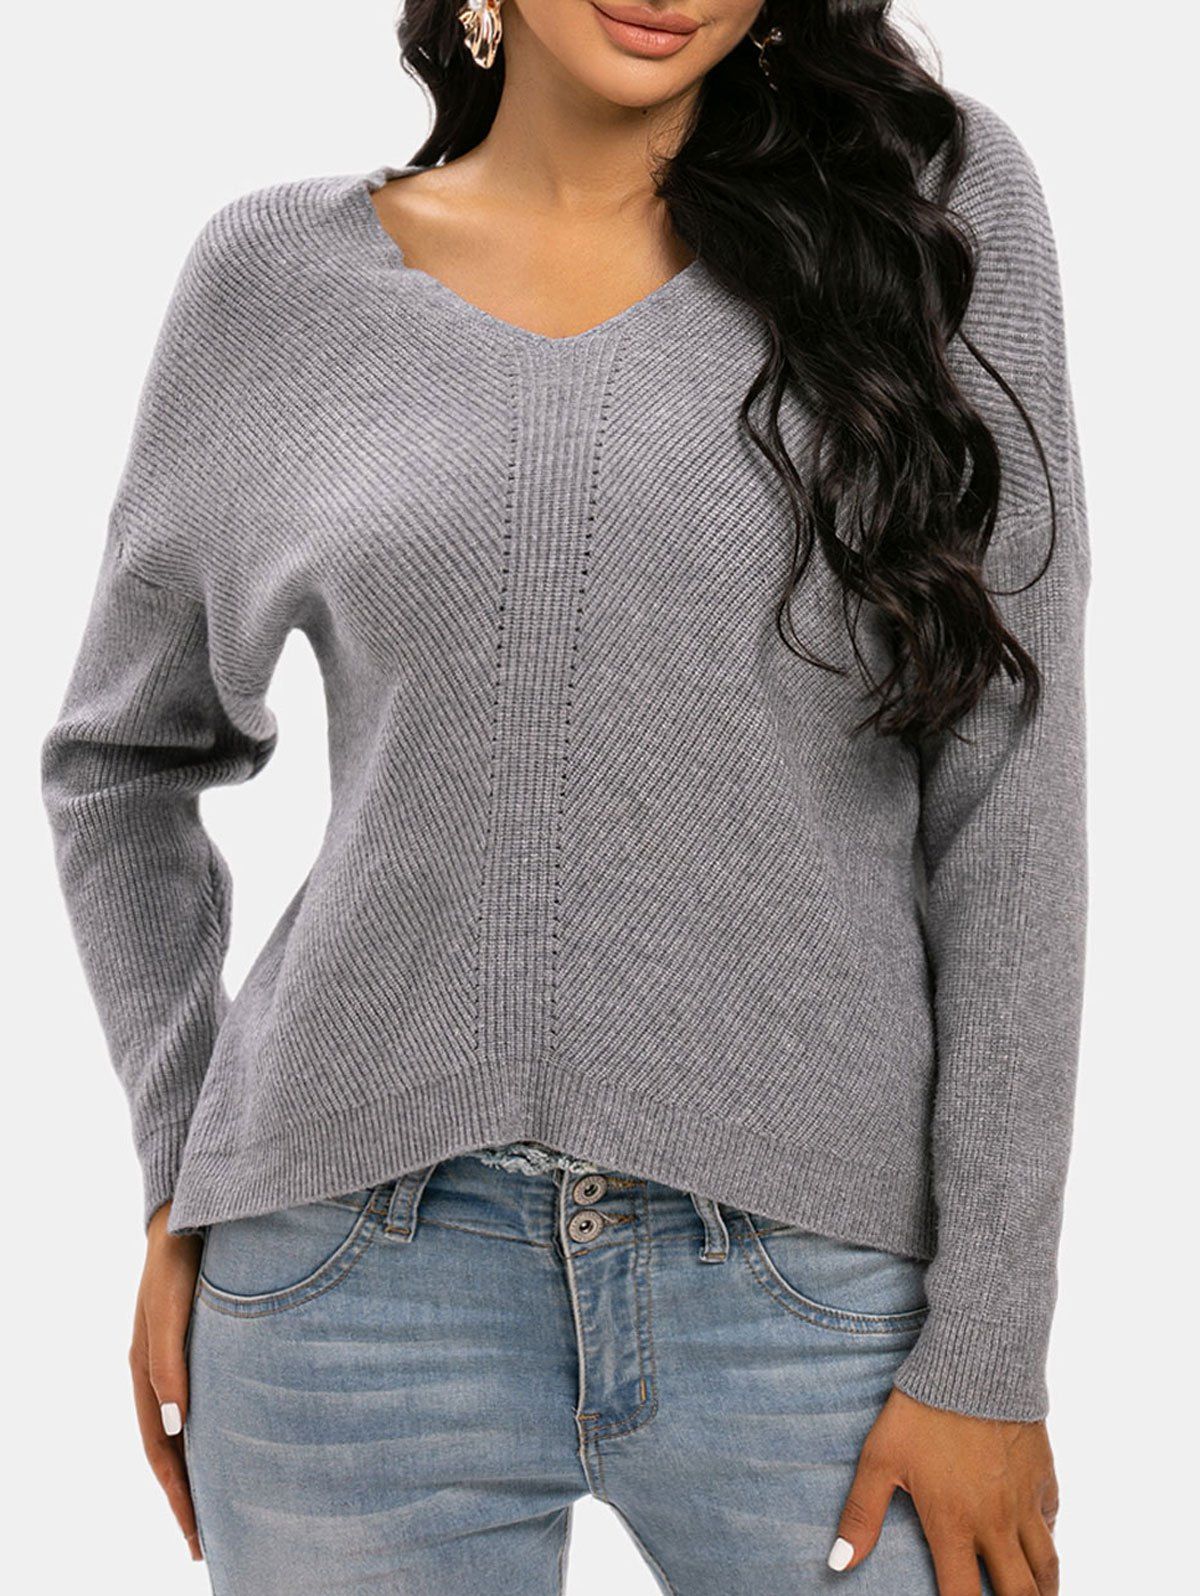 Drop Shoulder Pointelle Textured Knit Sweater - LIGHT GRAY ONE SIZE